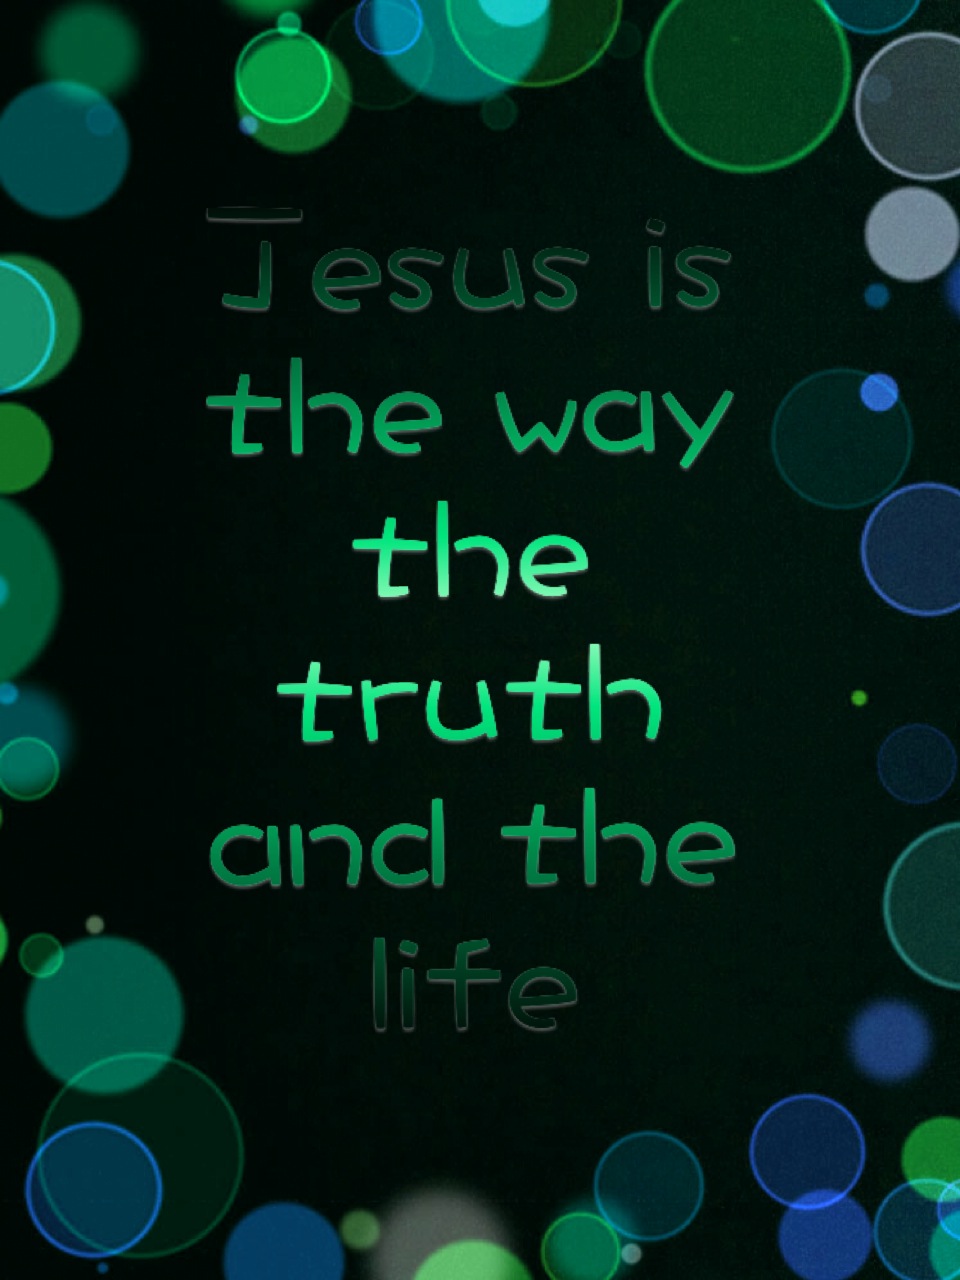 Christian Images In My Treasure Box: Jesus Is The Way